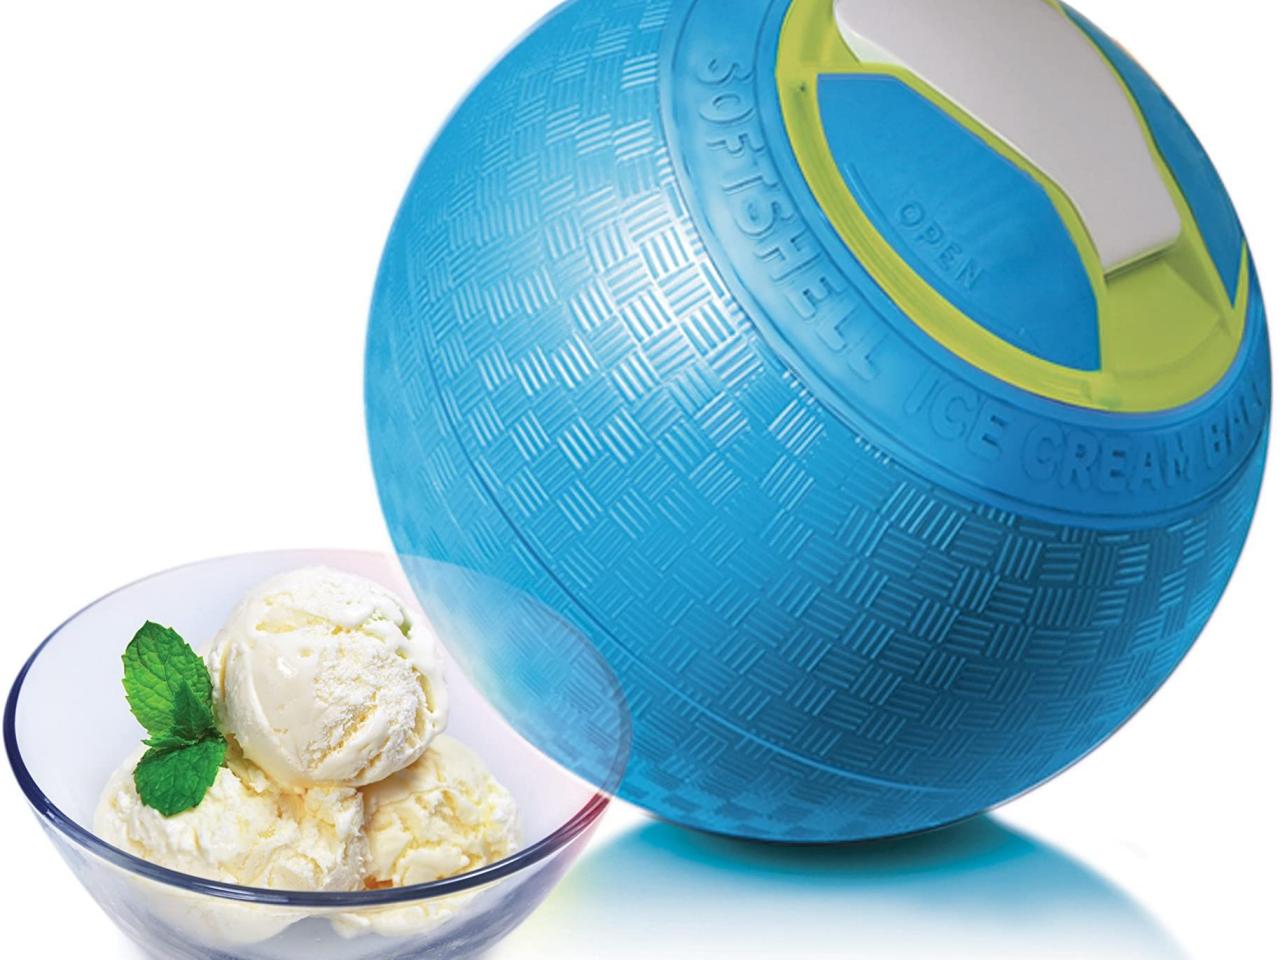 https://food.fnr.sndimg.com/content/dam/images/food/products/2020/6/26/rx_yaylabs-softshell-ice-cream-ball.jpeg.rend.hgtvcom.1280.960.suffix/1593202606376.jpeg